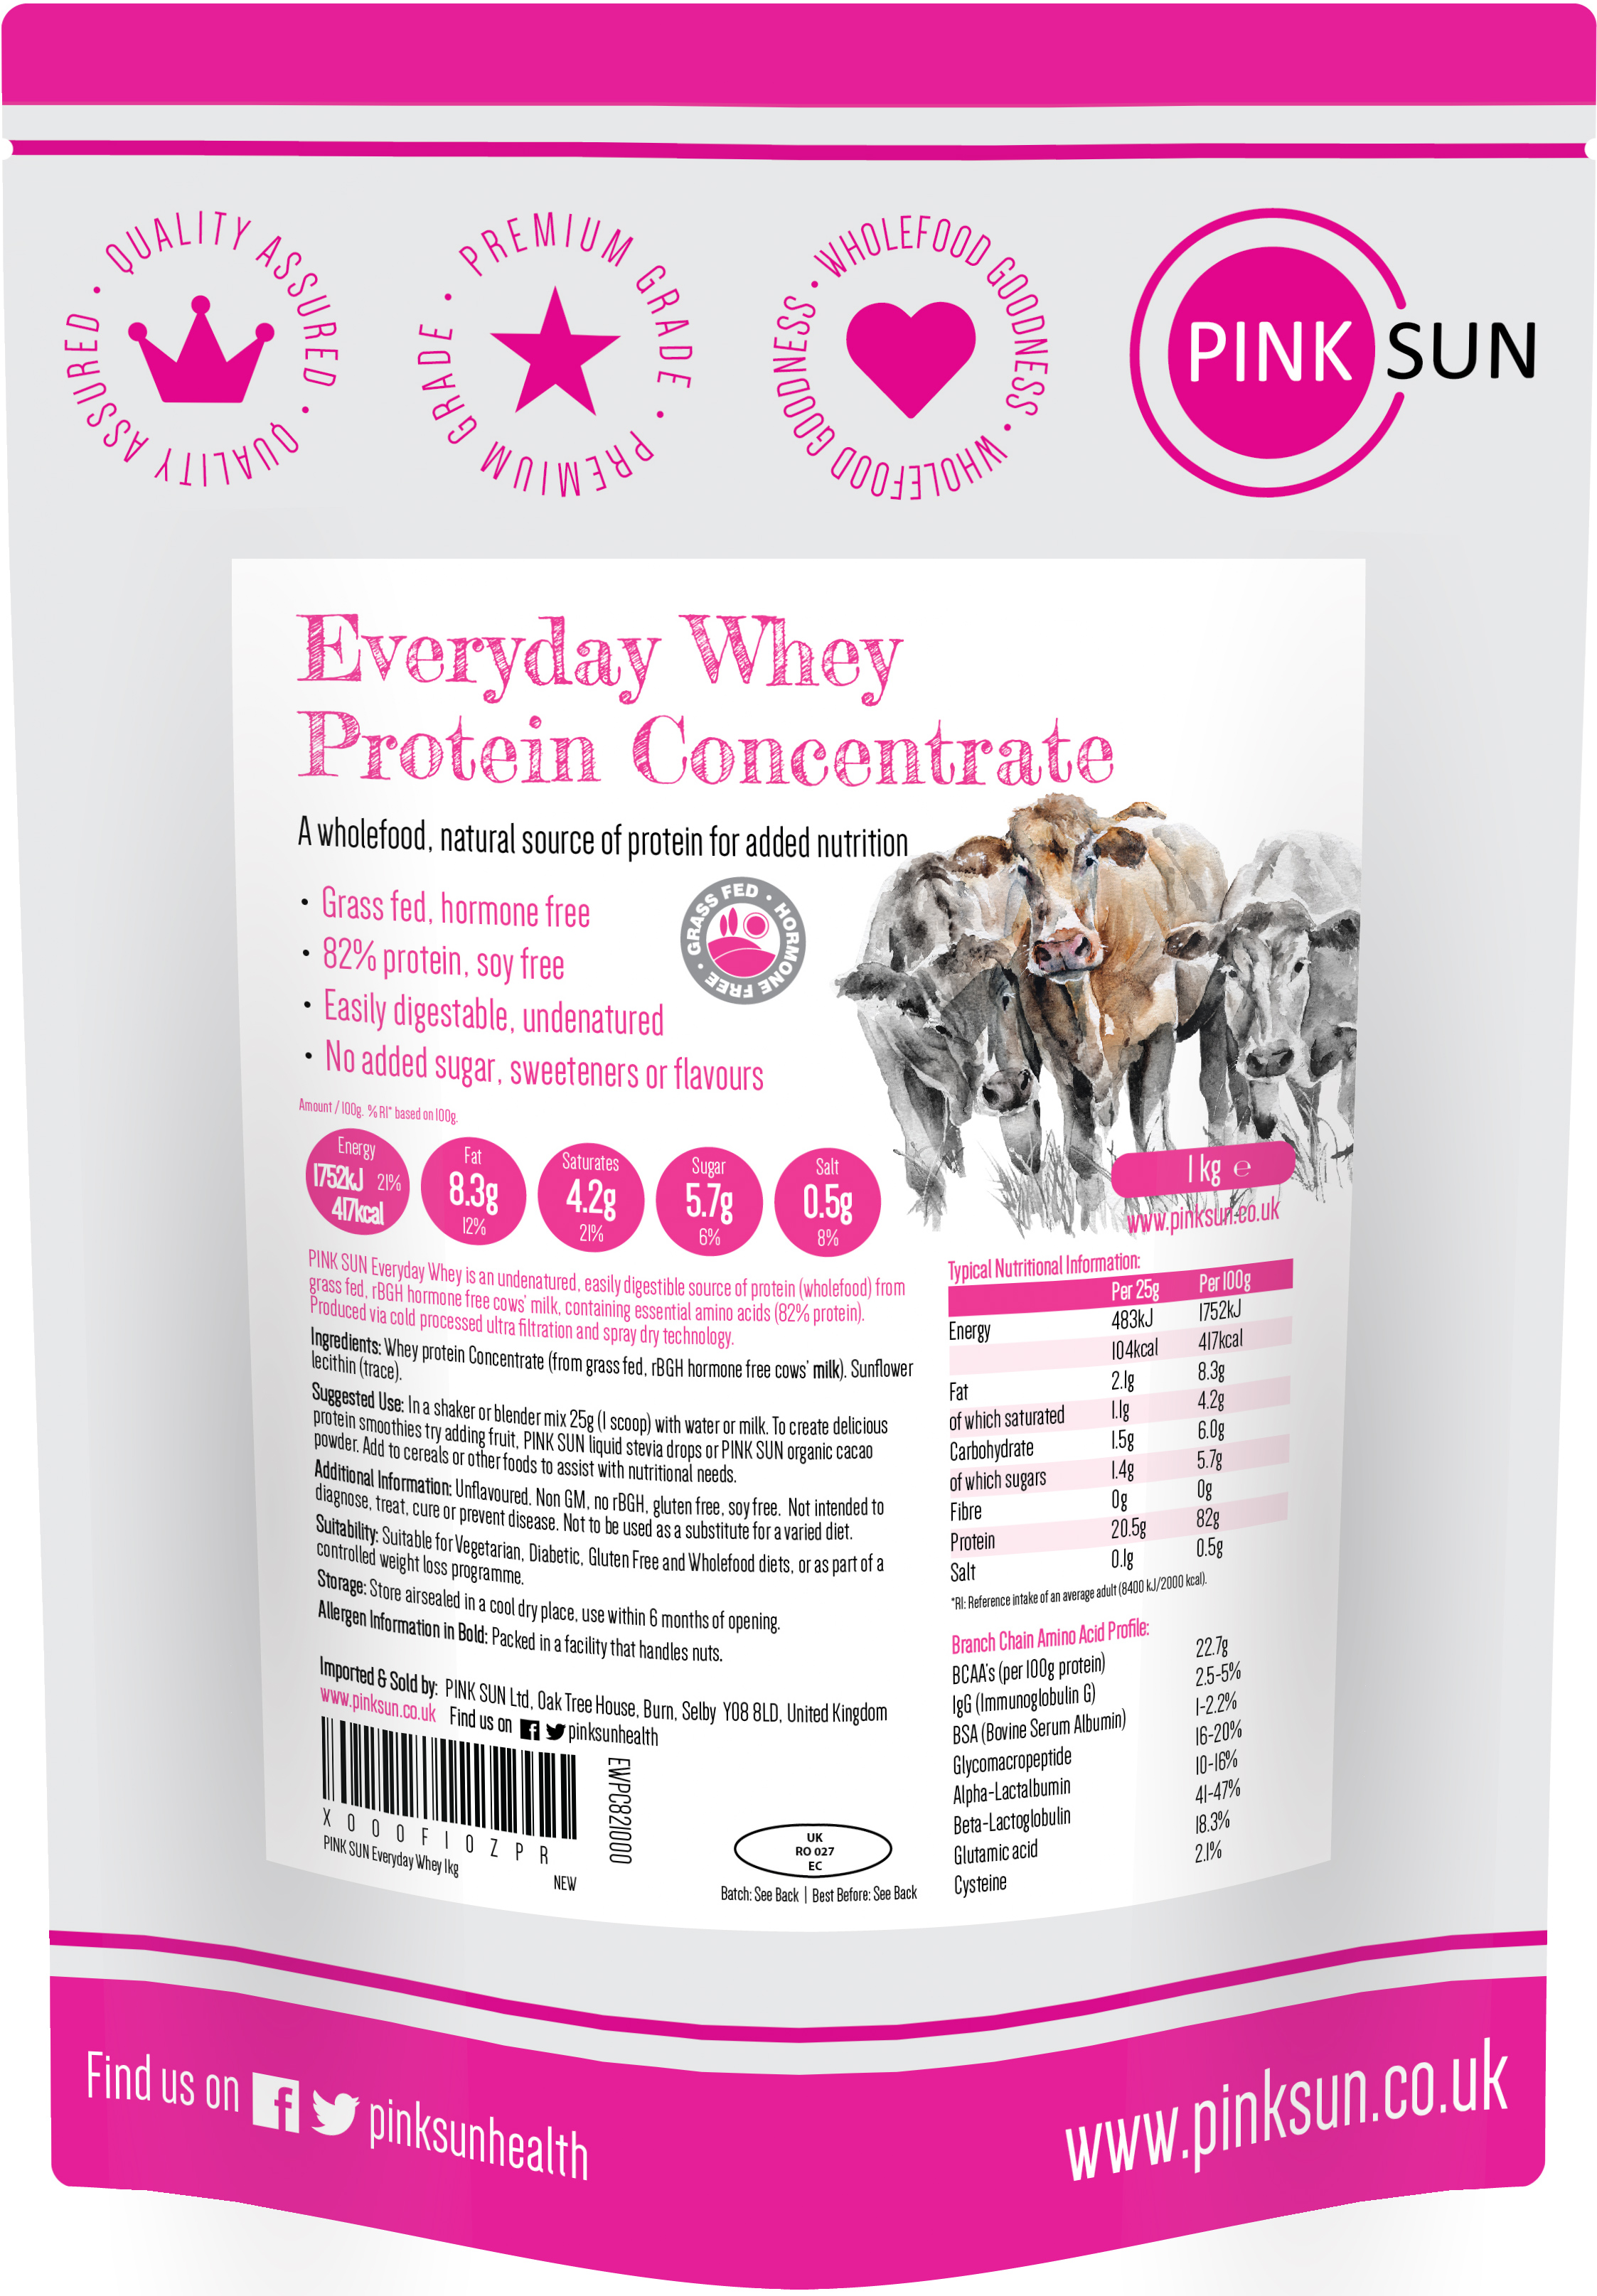 Everyday Whey Protein Concentrate